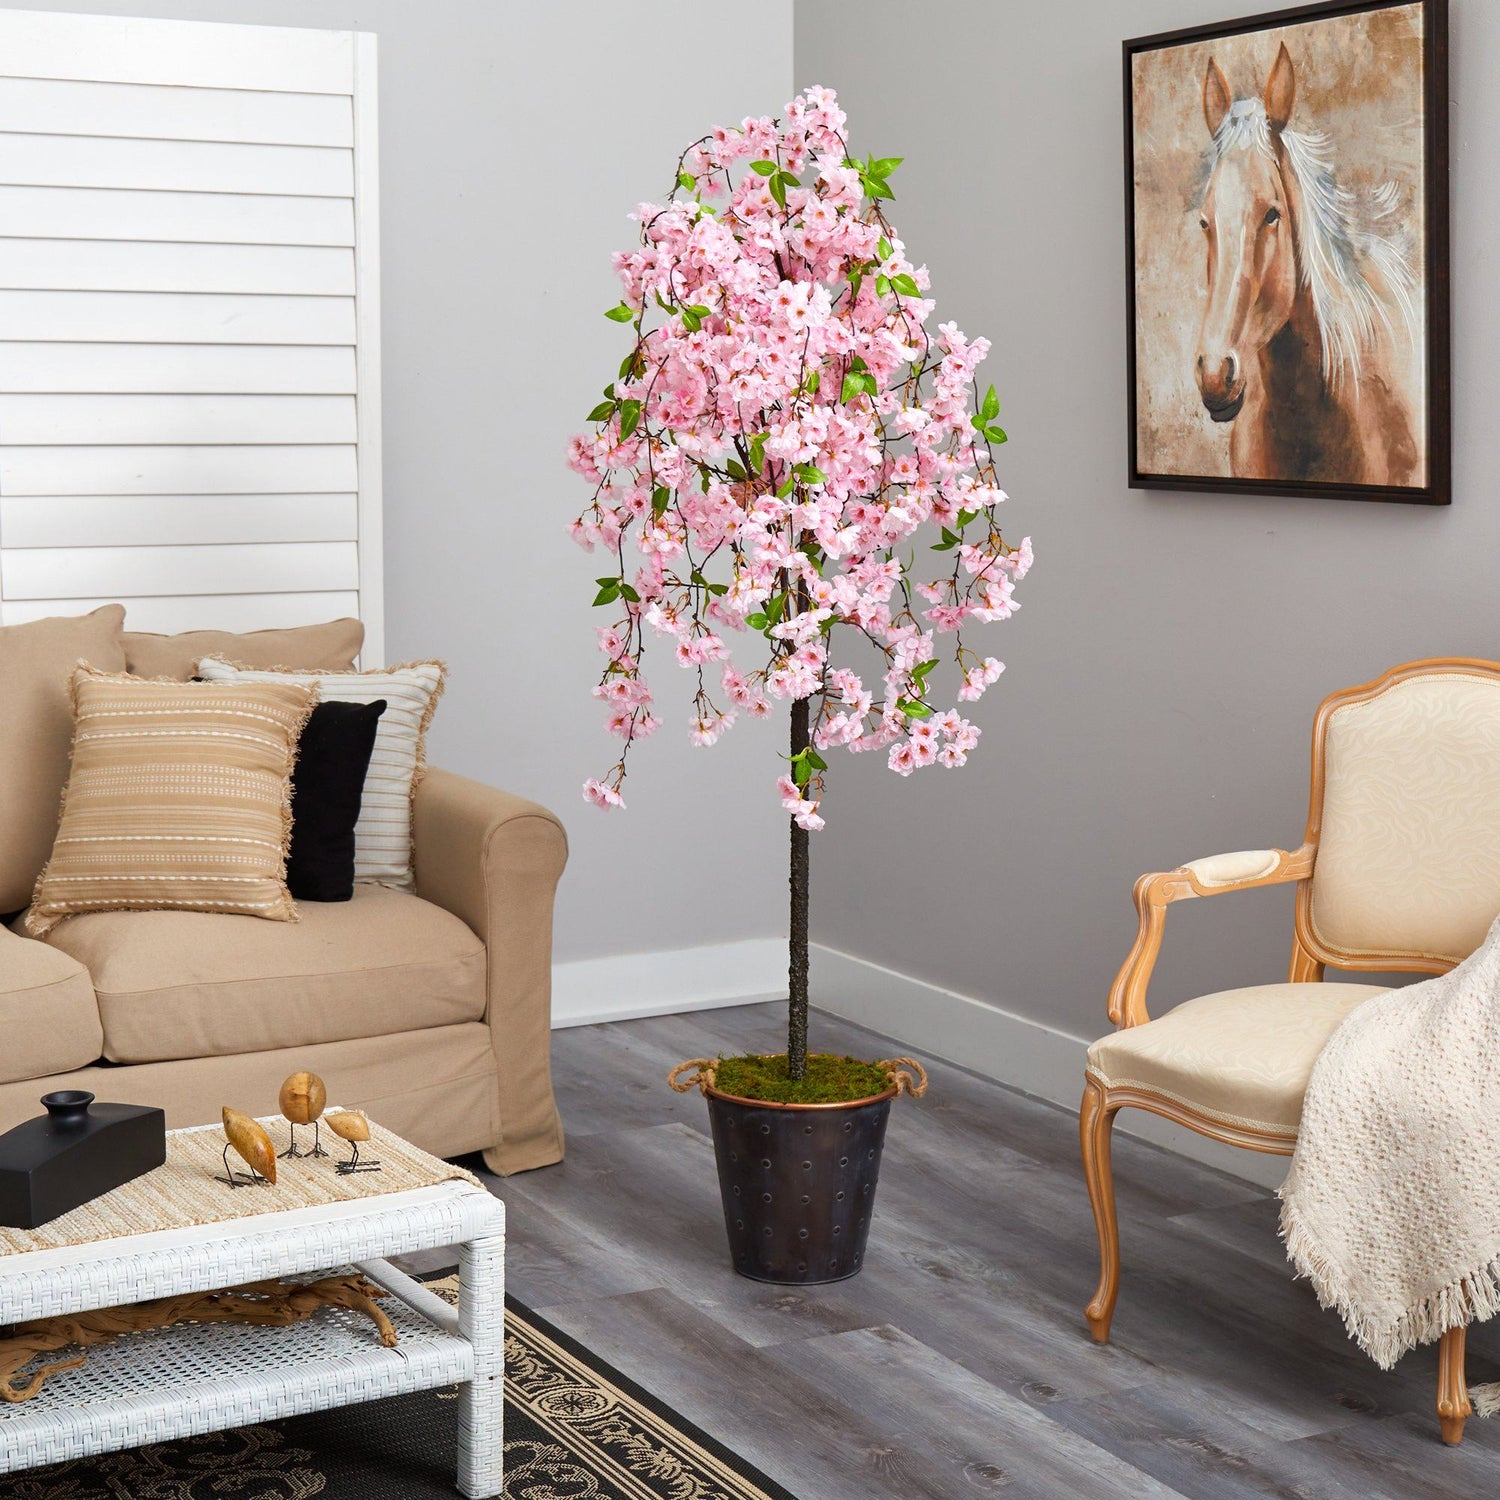 6' Artificial Cherry Blossom Tree in Decorative Metal Pail with Rope